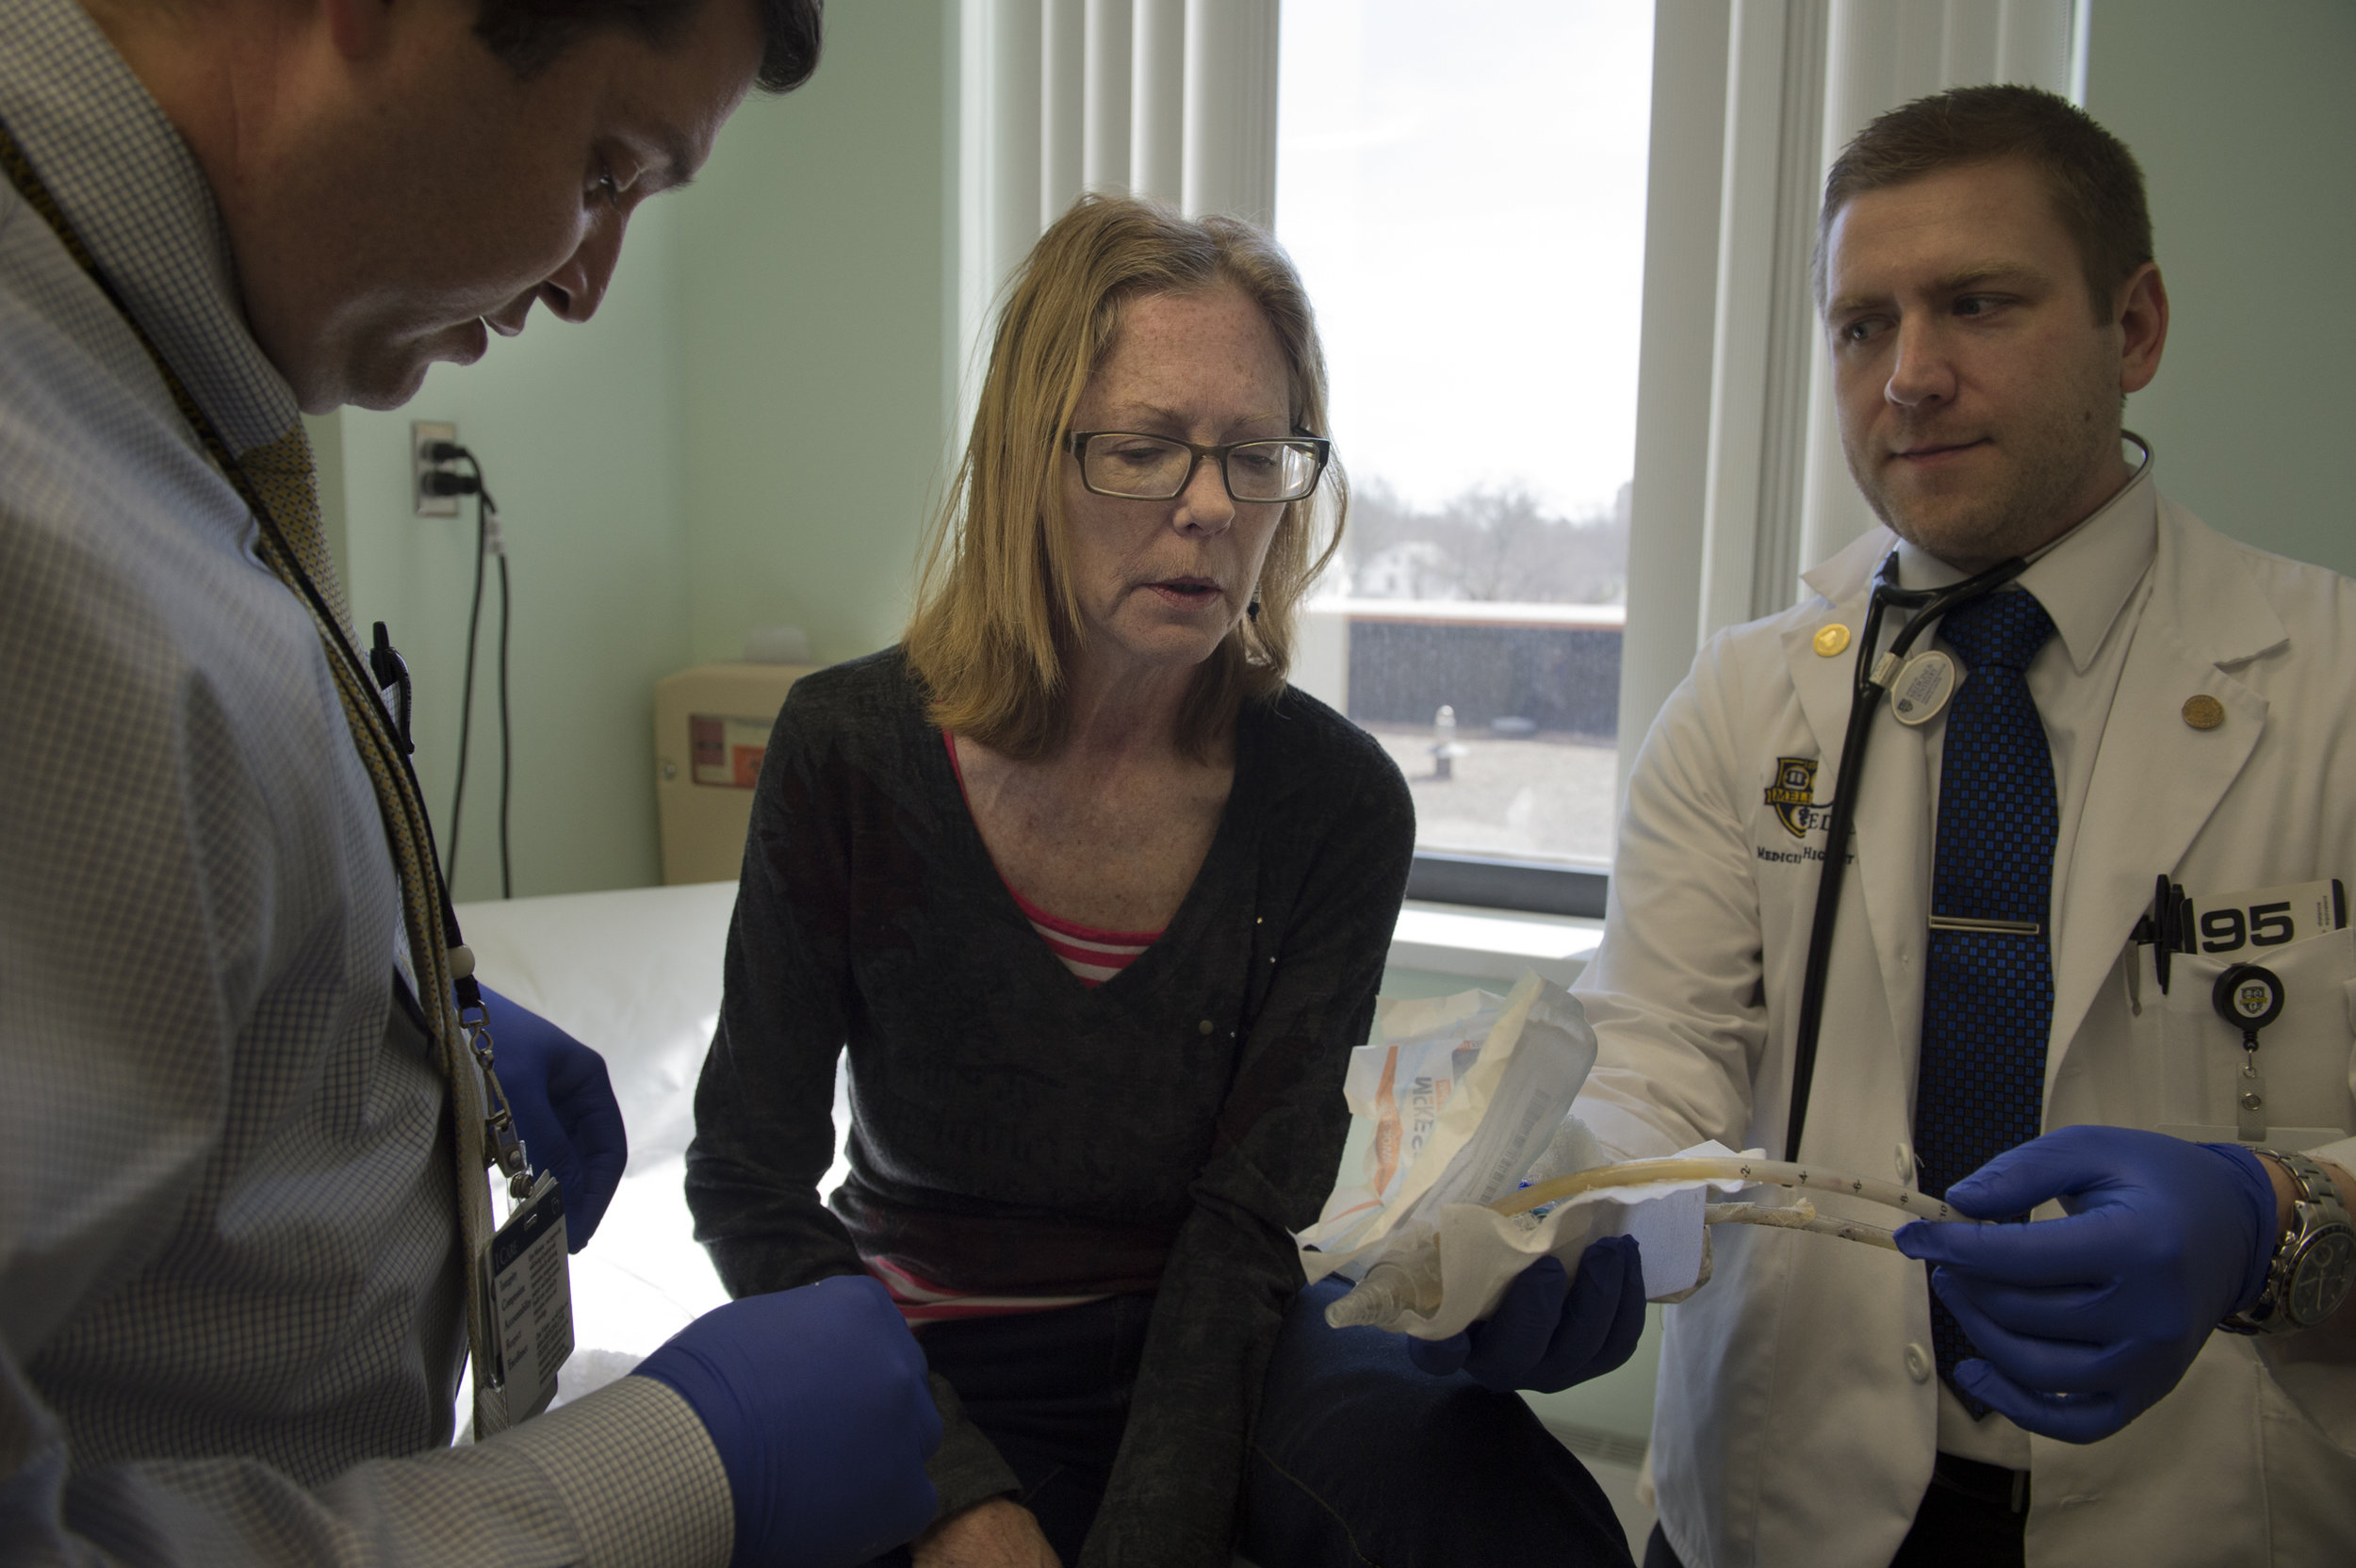  Carol is shown the chest tube that was inserted for lung drainage after a biopsy by her surgeon after it is removed. 